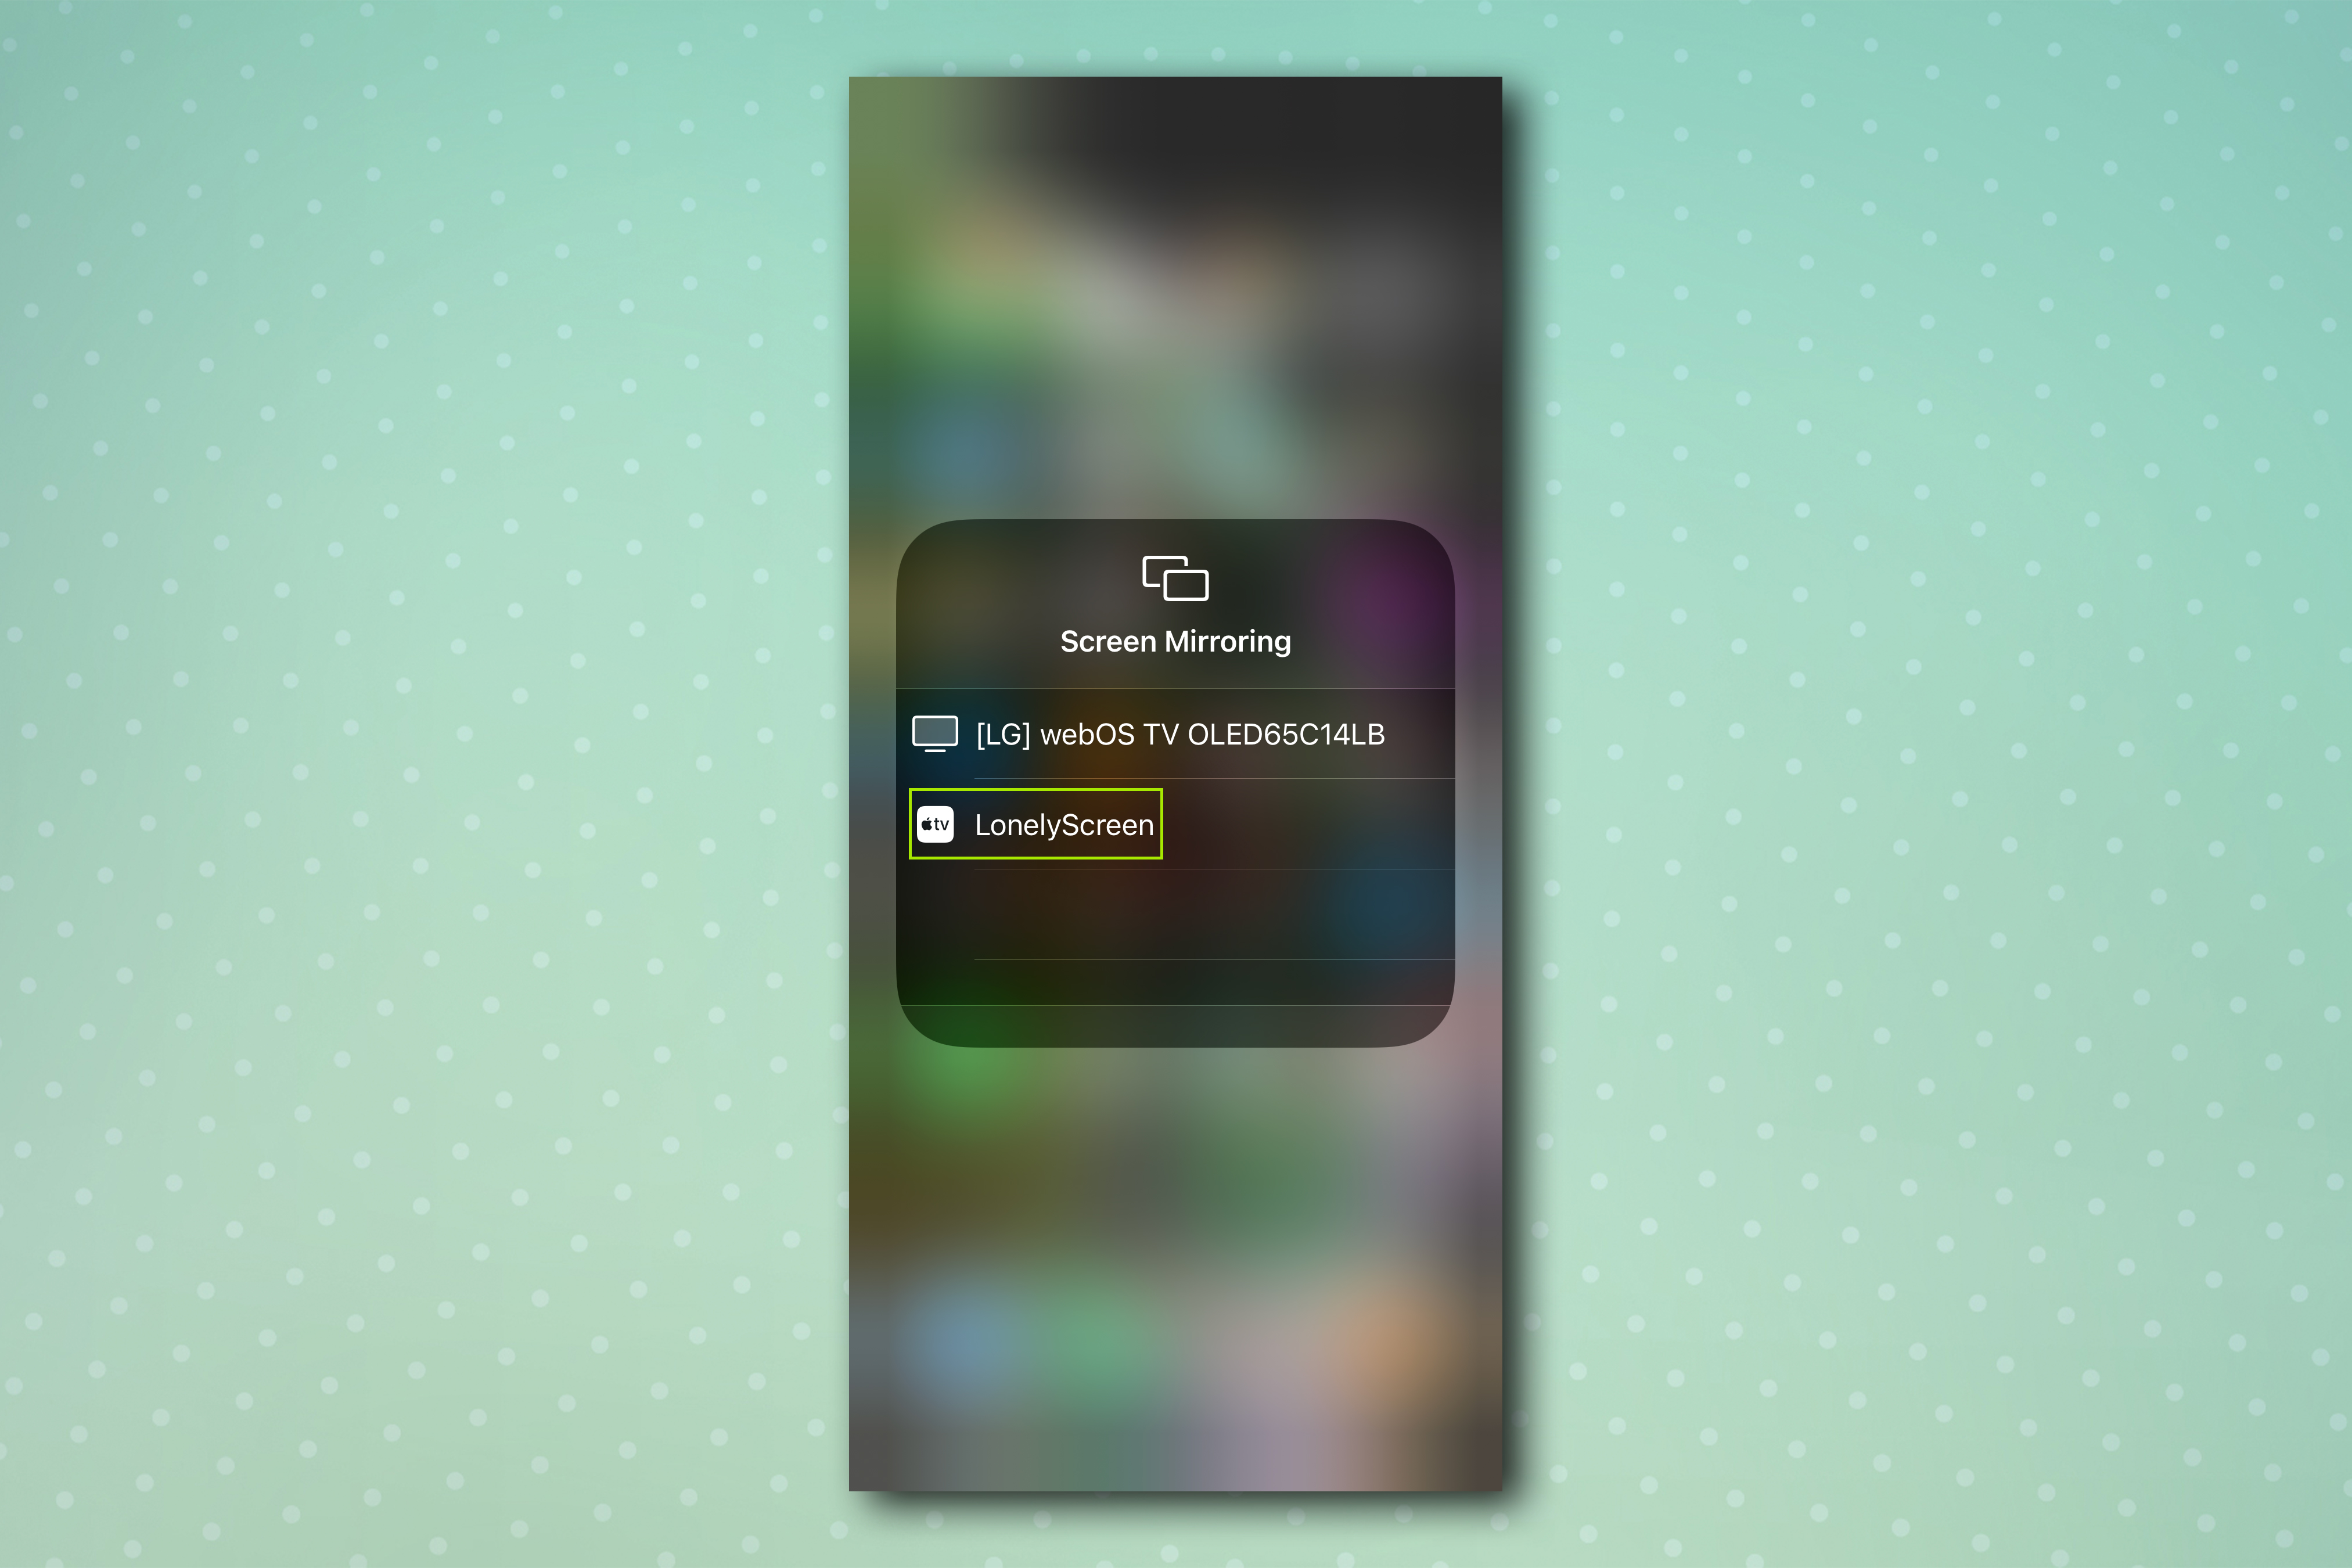 An iPhone AirPlay menu screen, demonstrating how to mirror an iPhone screen to PC